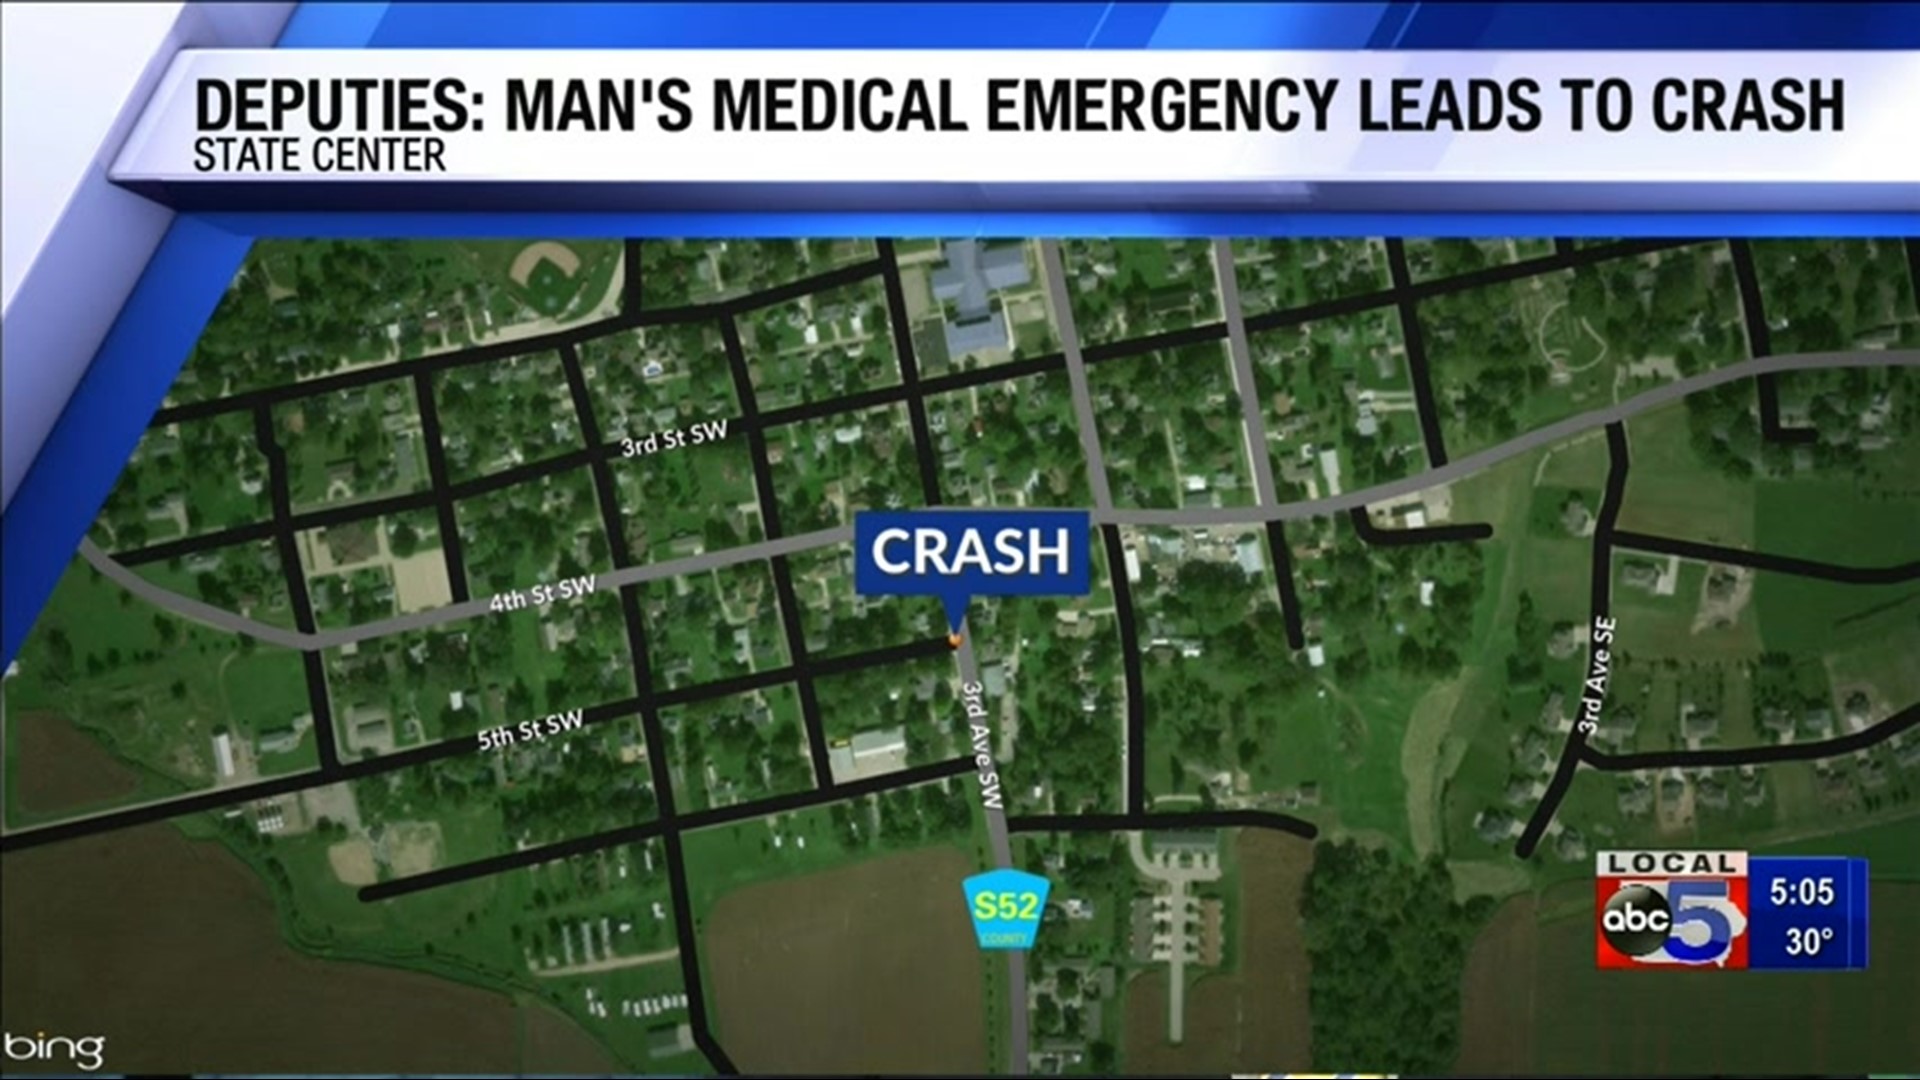 State Center man suffers medical emergency, crashes into light pole in Marshall County